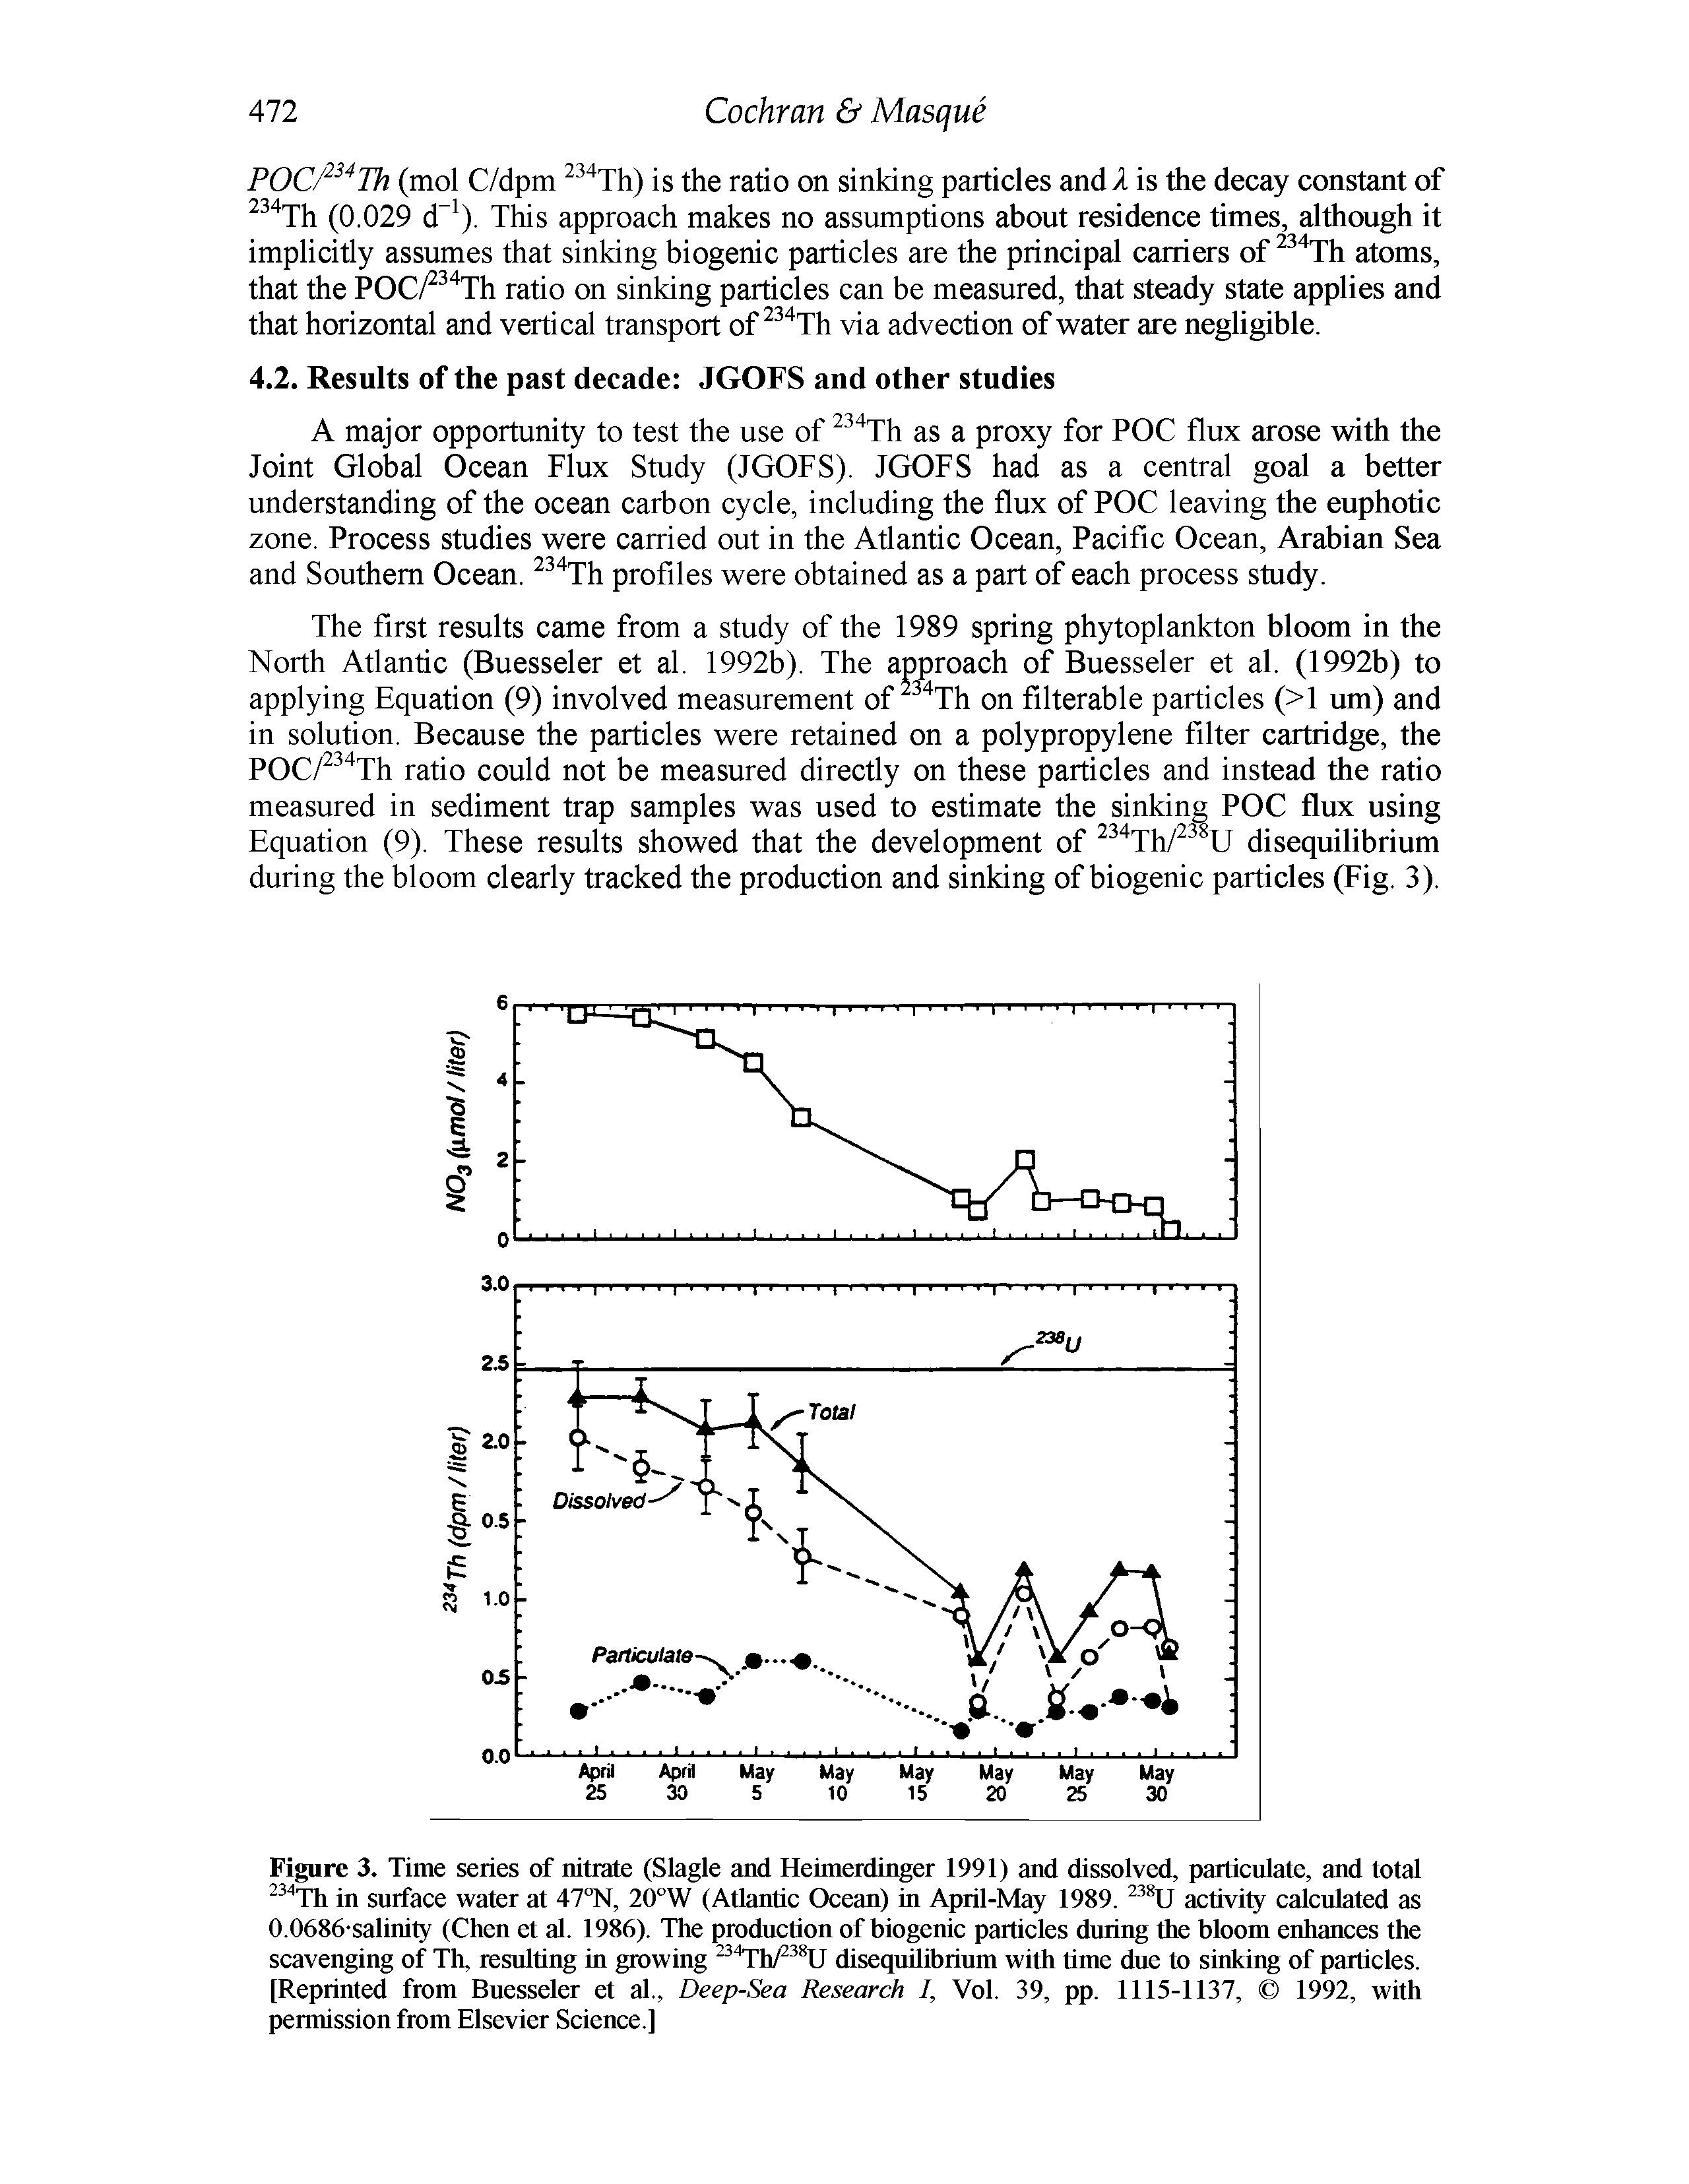 Figure 3. Time series of nitrate (Slagle and Heimerdinger 1991) and dissolved, particulate, and total in surface water at 47°N, 20°W (Atlantic Ocean) in April-May 1989. activity calculated as 0.0686 salinity (Chen et al. 1986). The production of biogenic particles during the bloom enhances the scavenging of Th, resulting in growing disequilibrium with time due to sinking of particles.